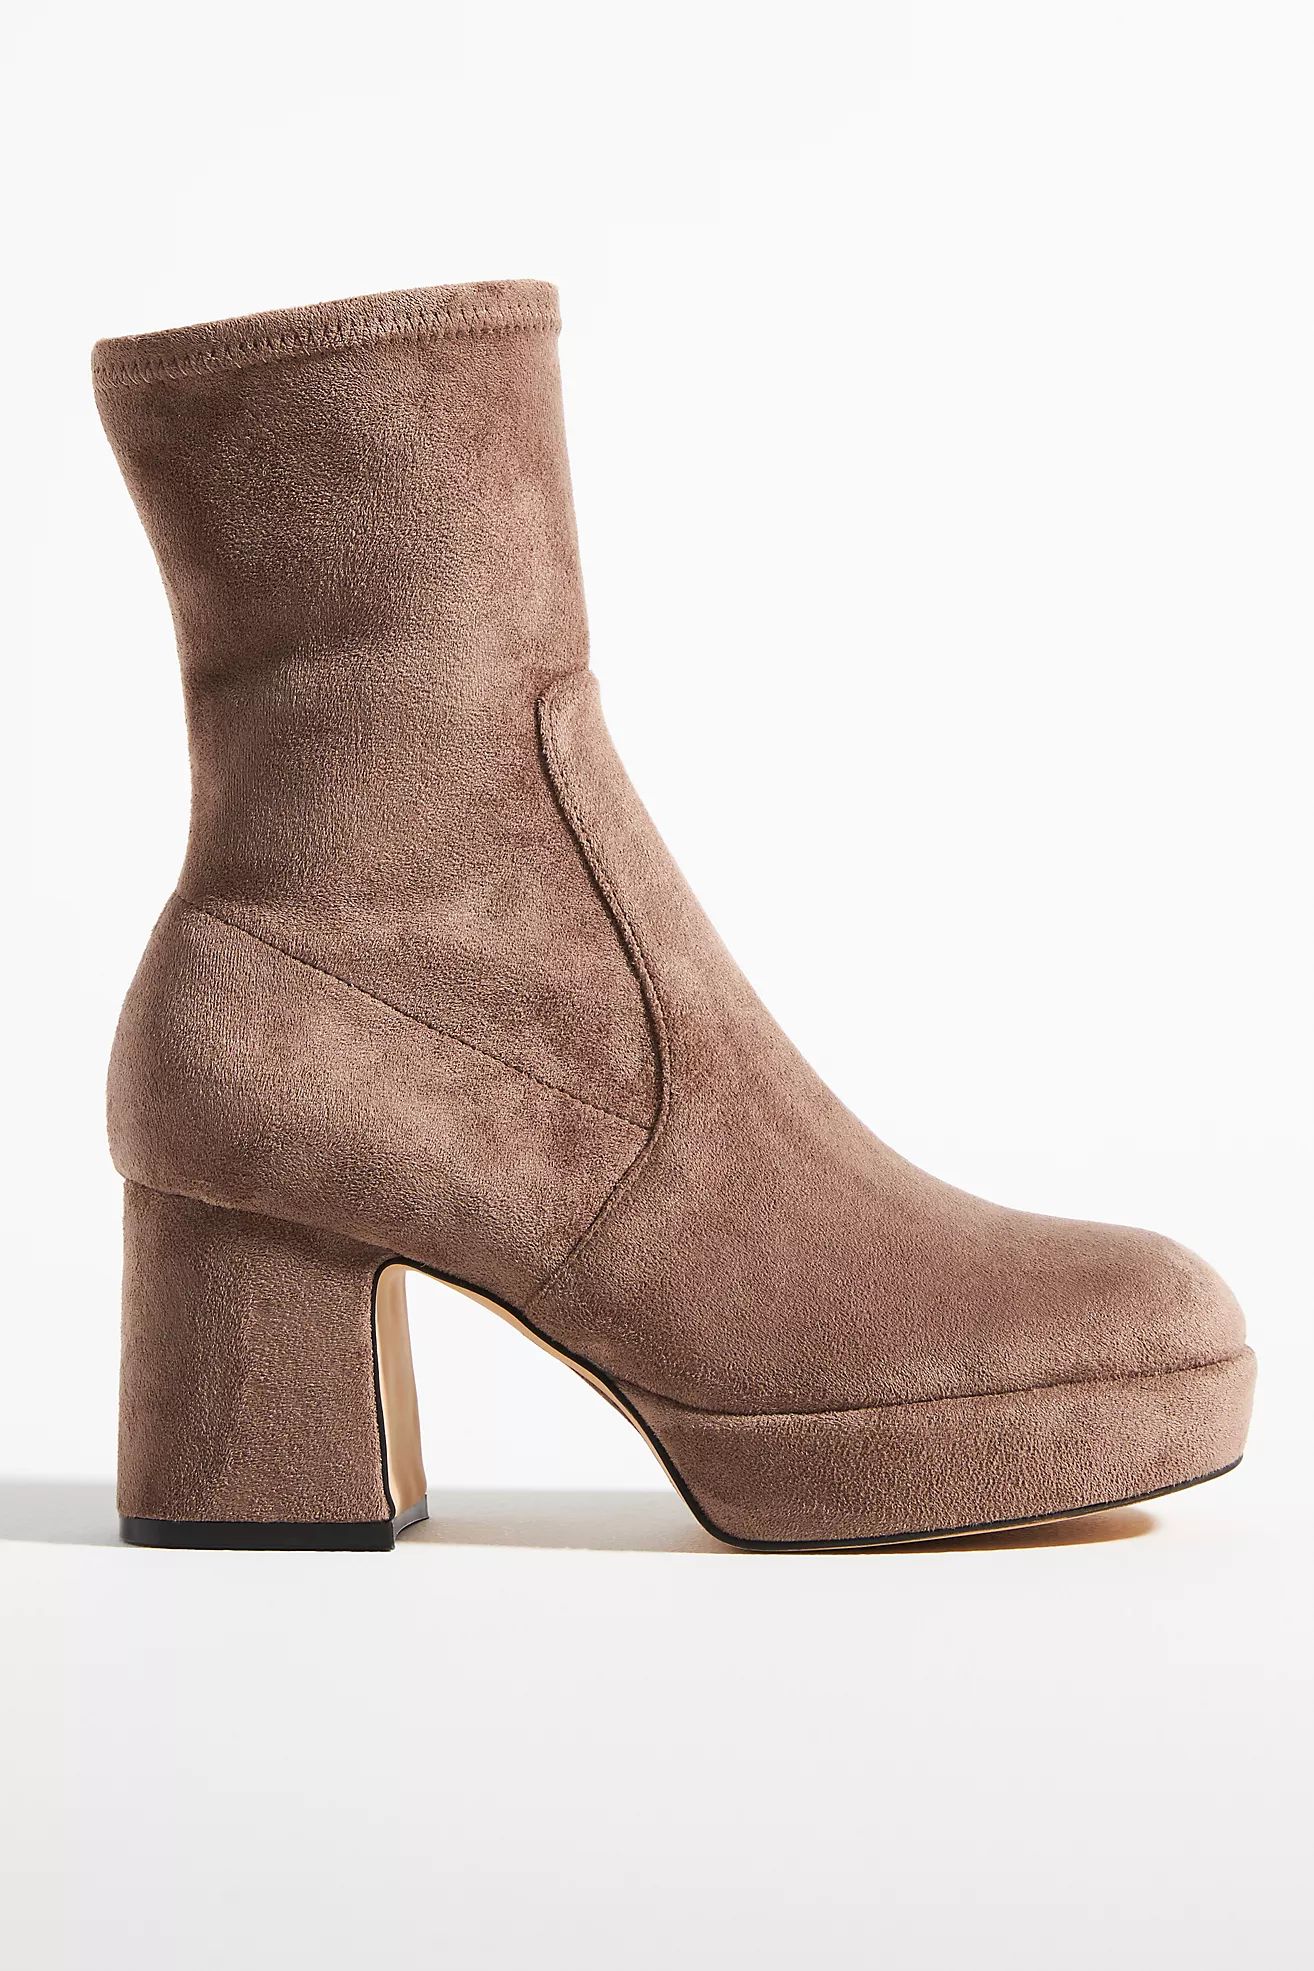 Silent D Otto Booties | Anthropologie (US)